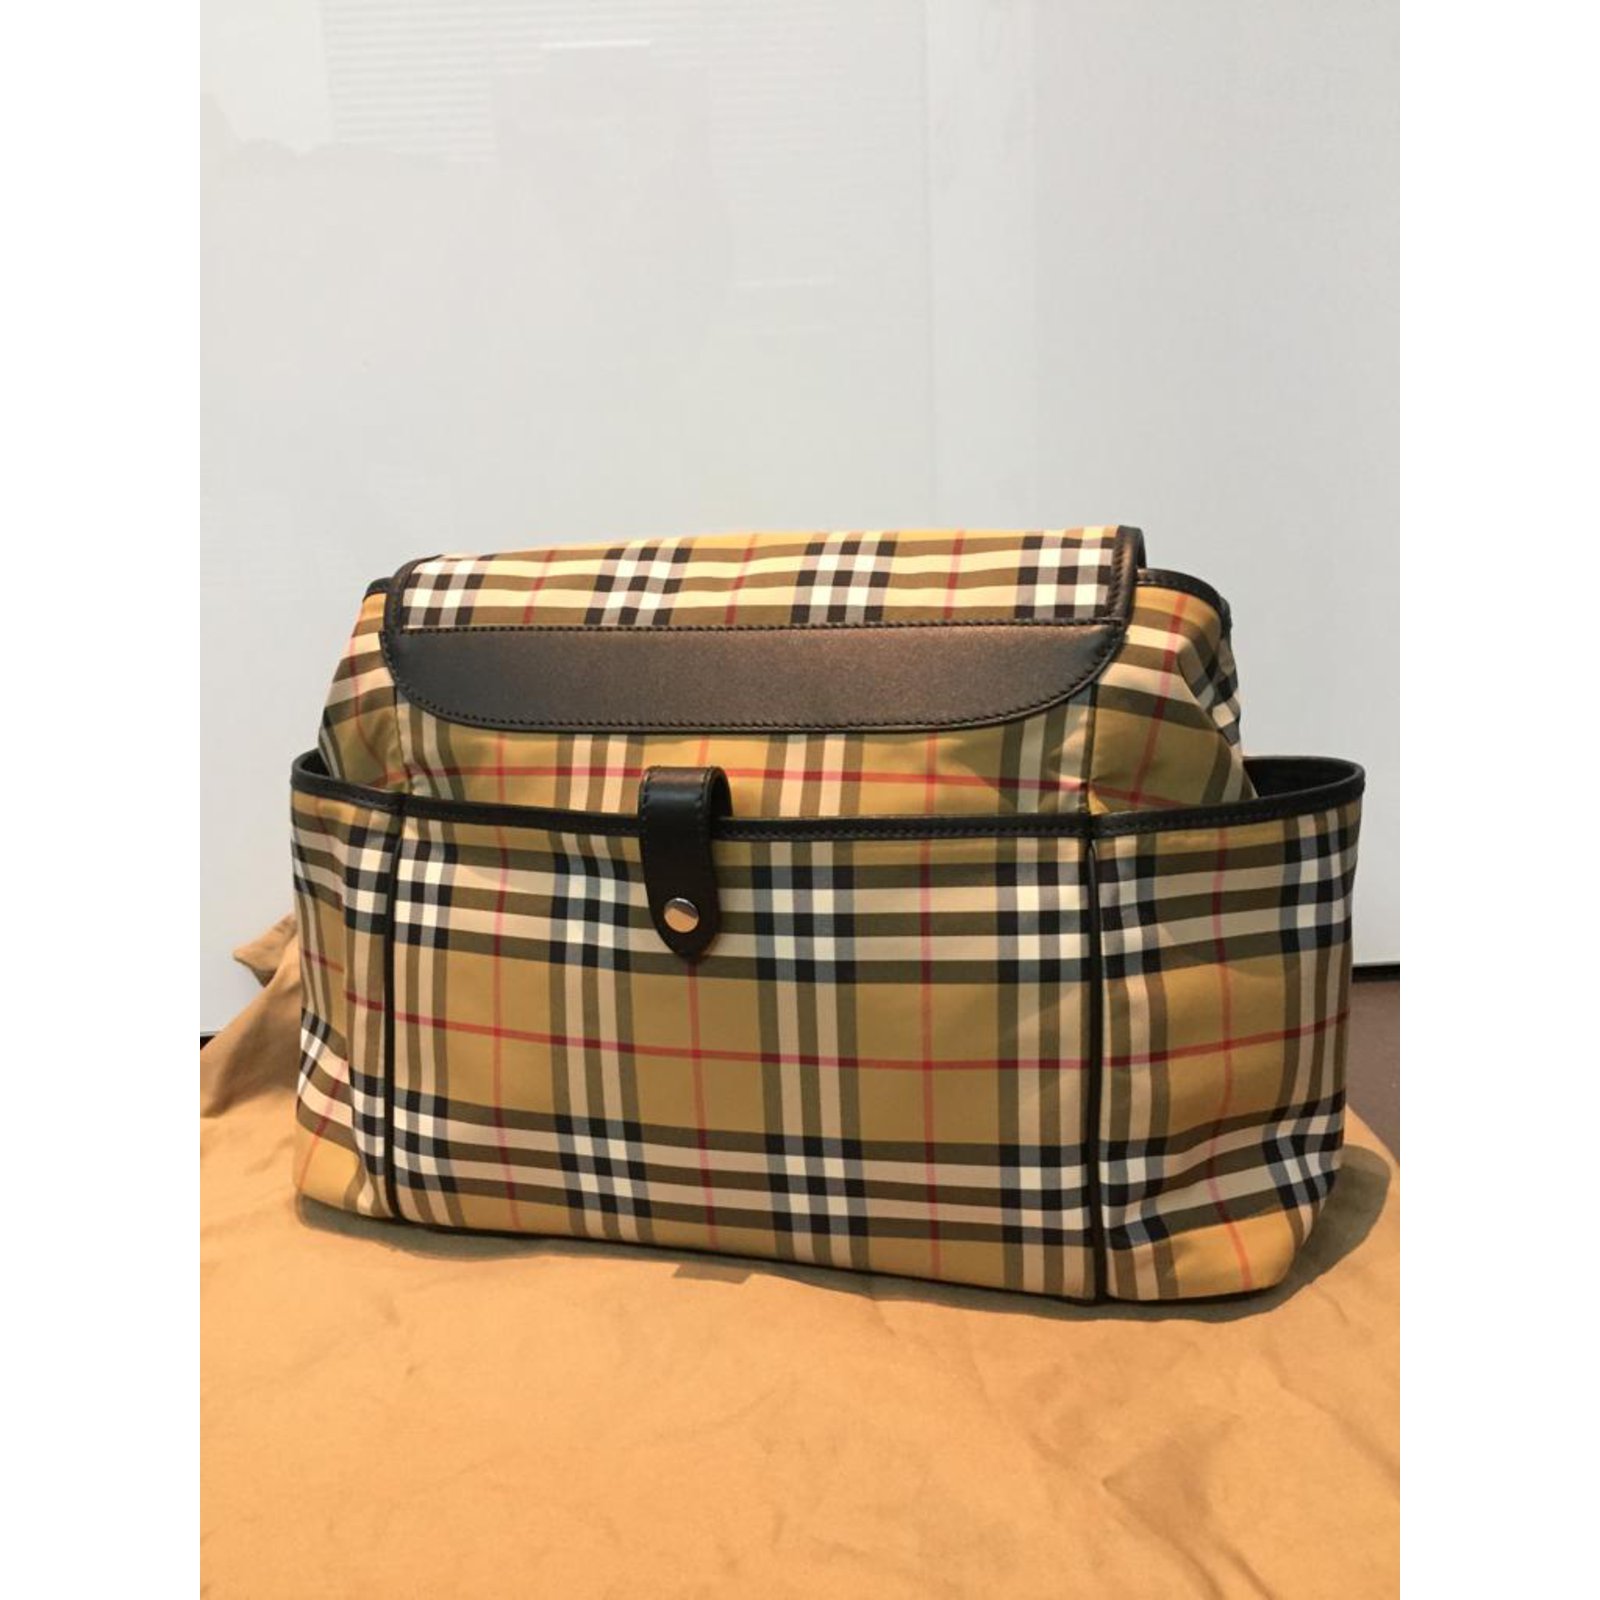 burberry dog bed